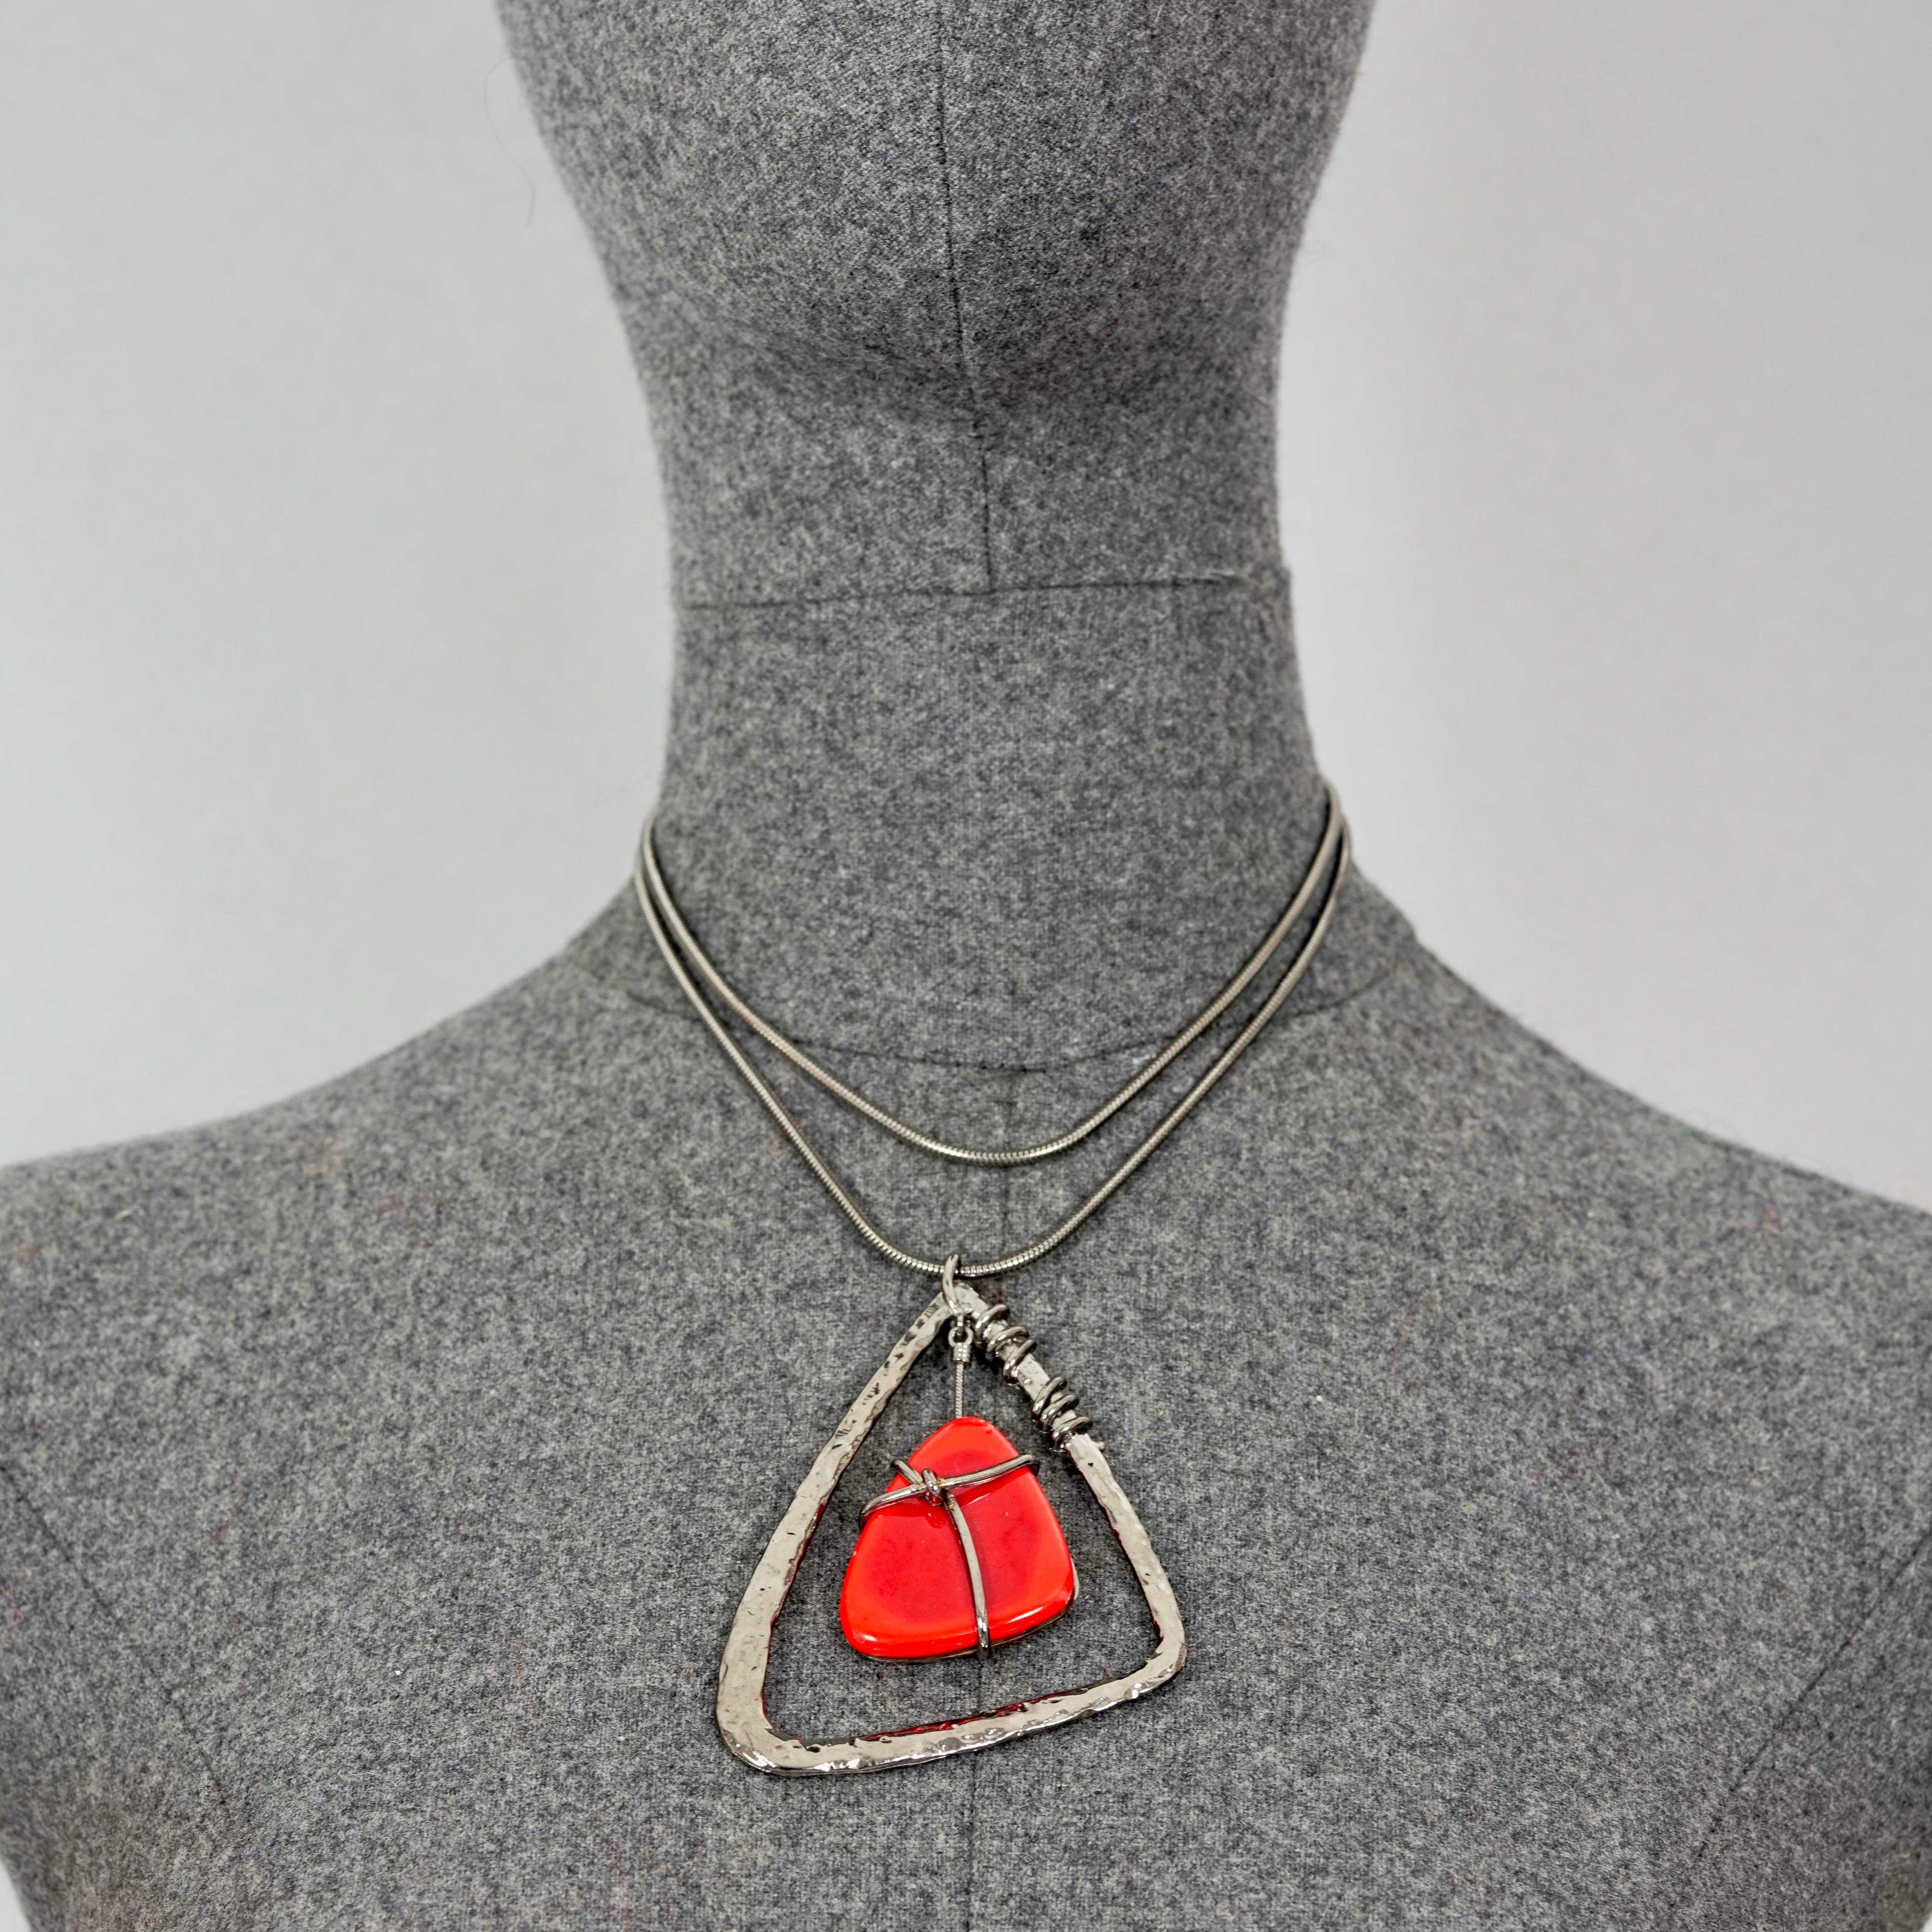 Vintage JEAN PAUL GAULTIER Modernist Triangle Glass Stone Necklace

Measurements:
Pendant Height: 3.34 inches (8.5 cm)
Wearable Length: 30.70 inches to 31.88 inches (78 cm to 81 cm)

Features:
- 100% Authentic JEAN PAUL GAULTIER.
- Modernist wire